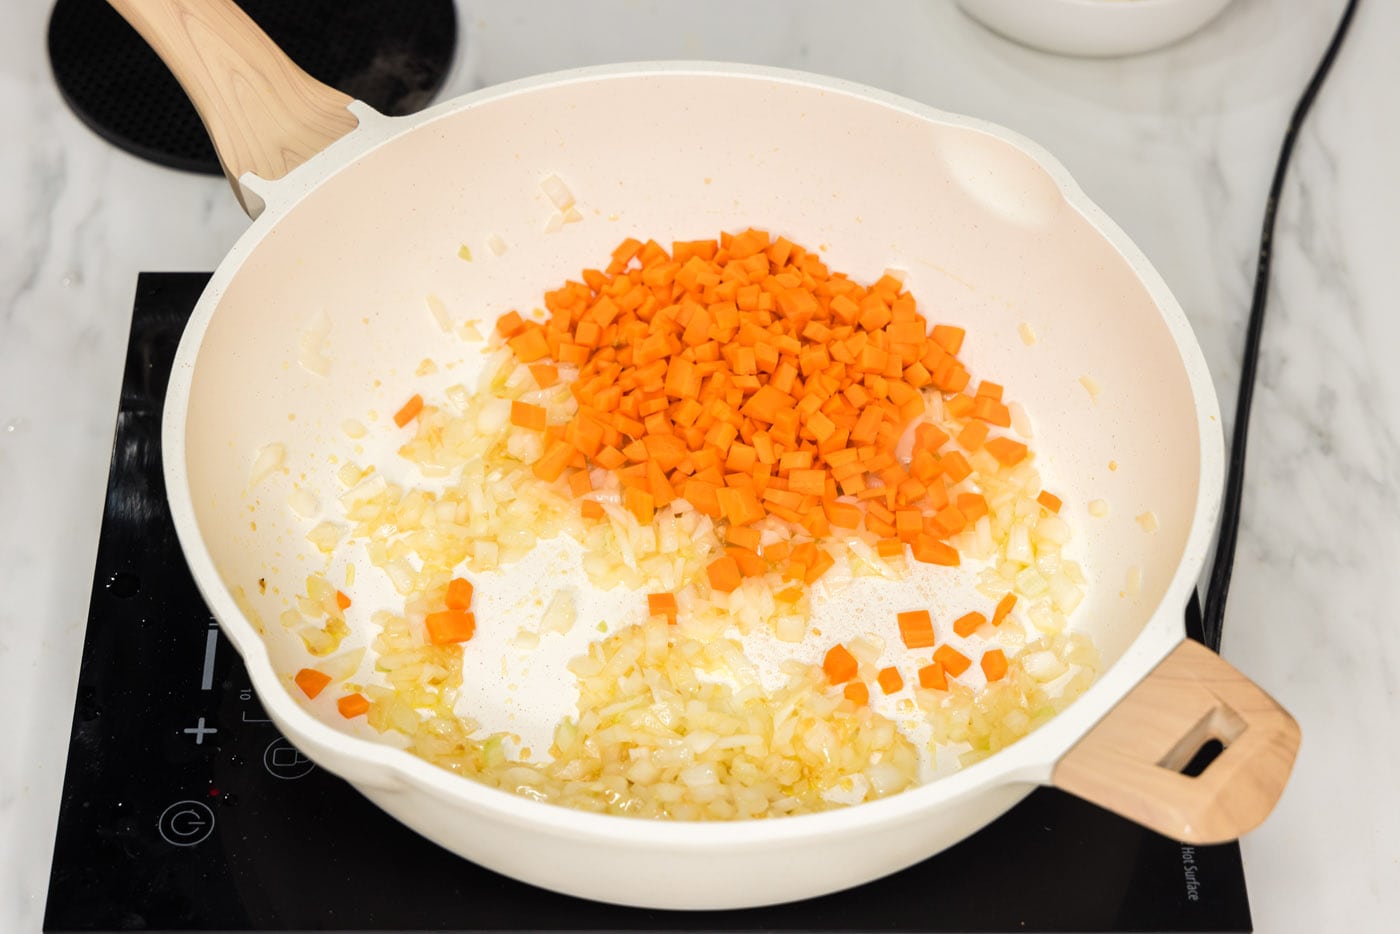 diced carrots added to skillet with onion, garlic, and ginger